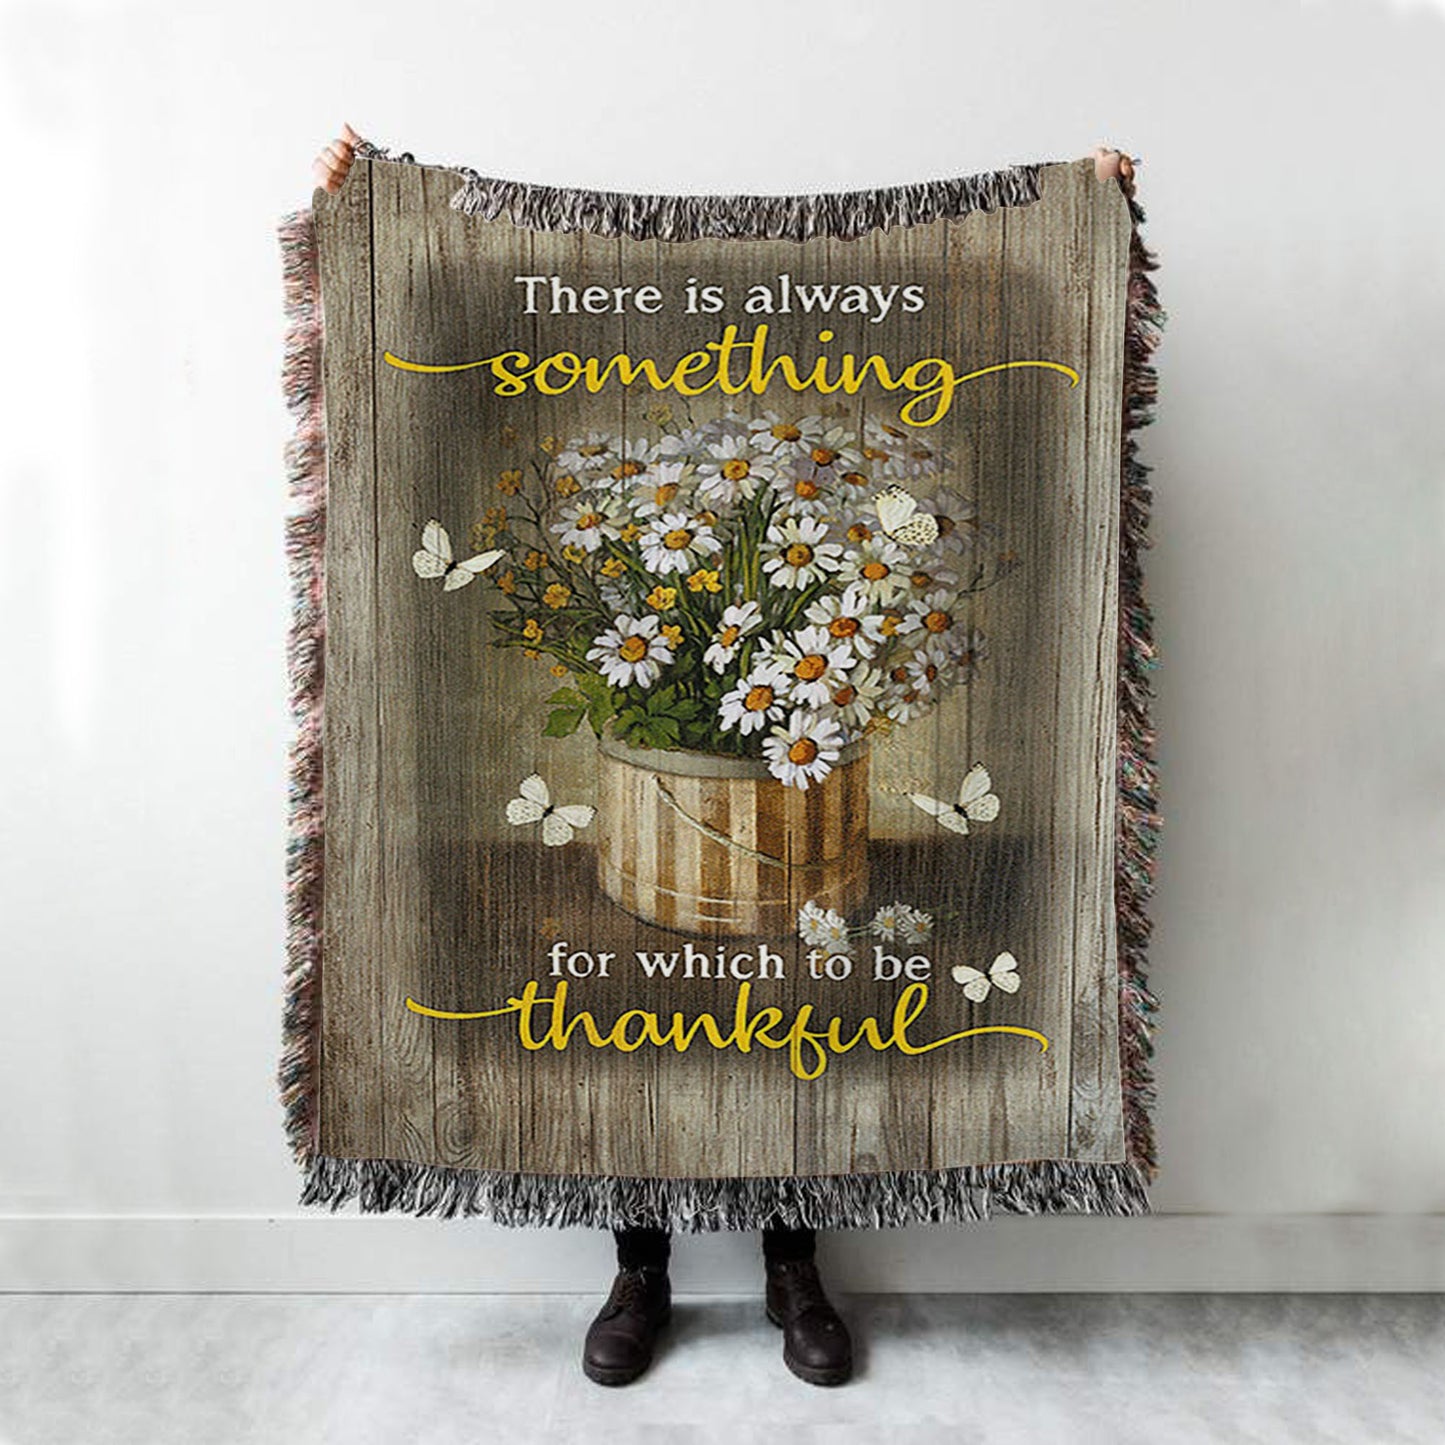 There Is Always Something For Which To Be Thankful Daisy White Butterfly Woven Blanket Print - Inspirational Woven Blanket Art - Christian Throw Blanket Home Decor